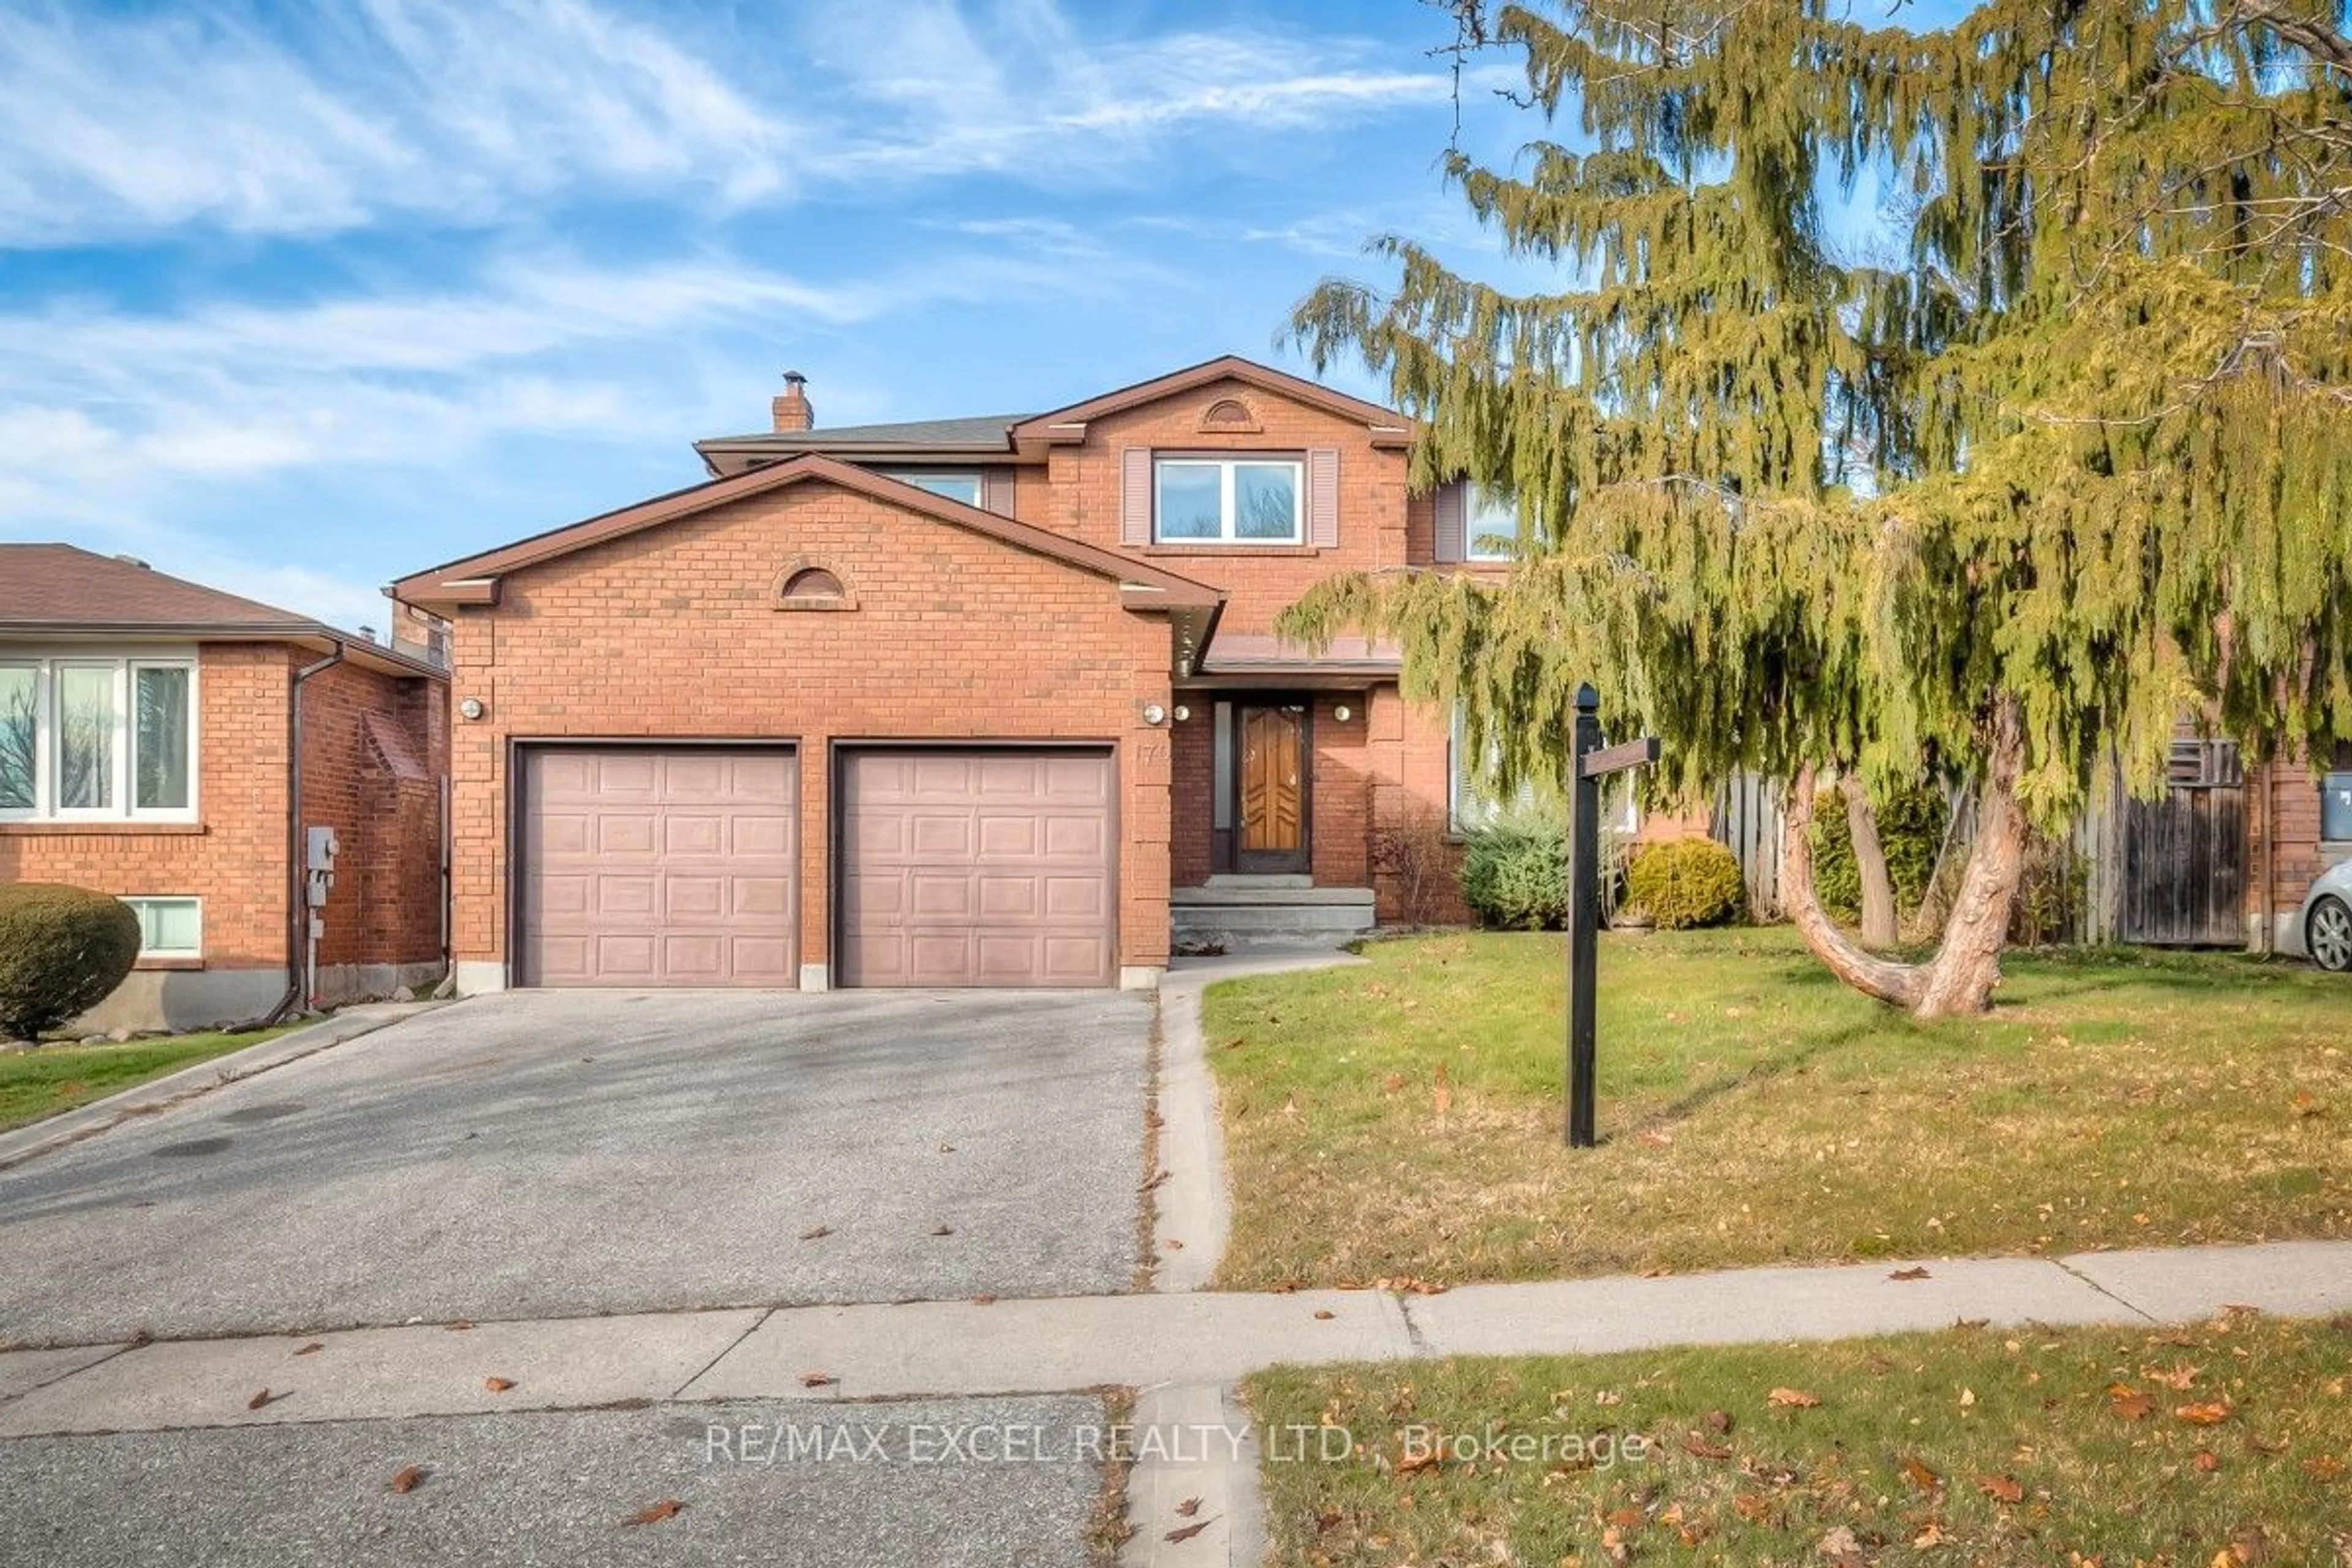 Frontside or backside of a home for 170 Amber Ave, Oshawa Ontario L1J 7V5